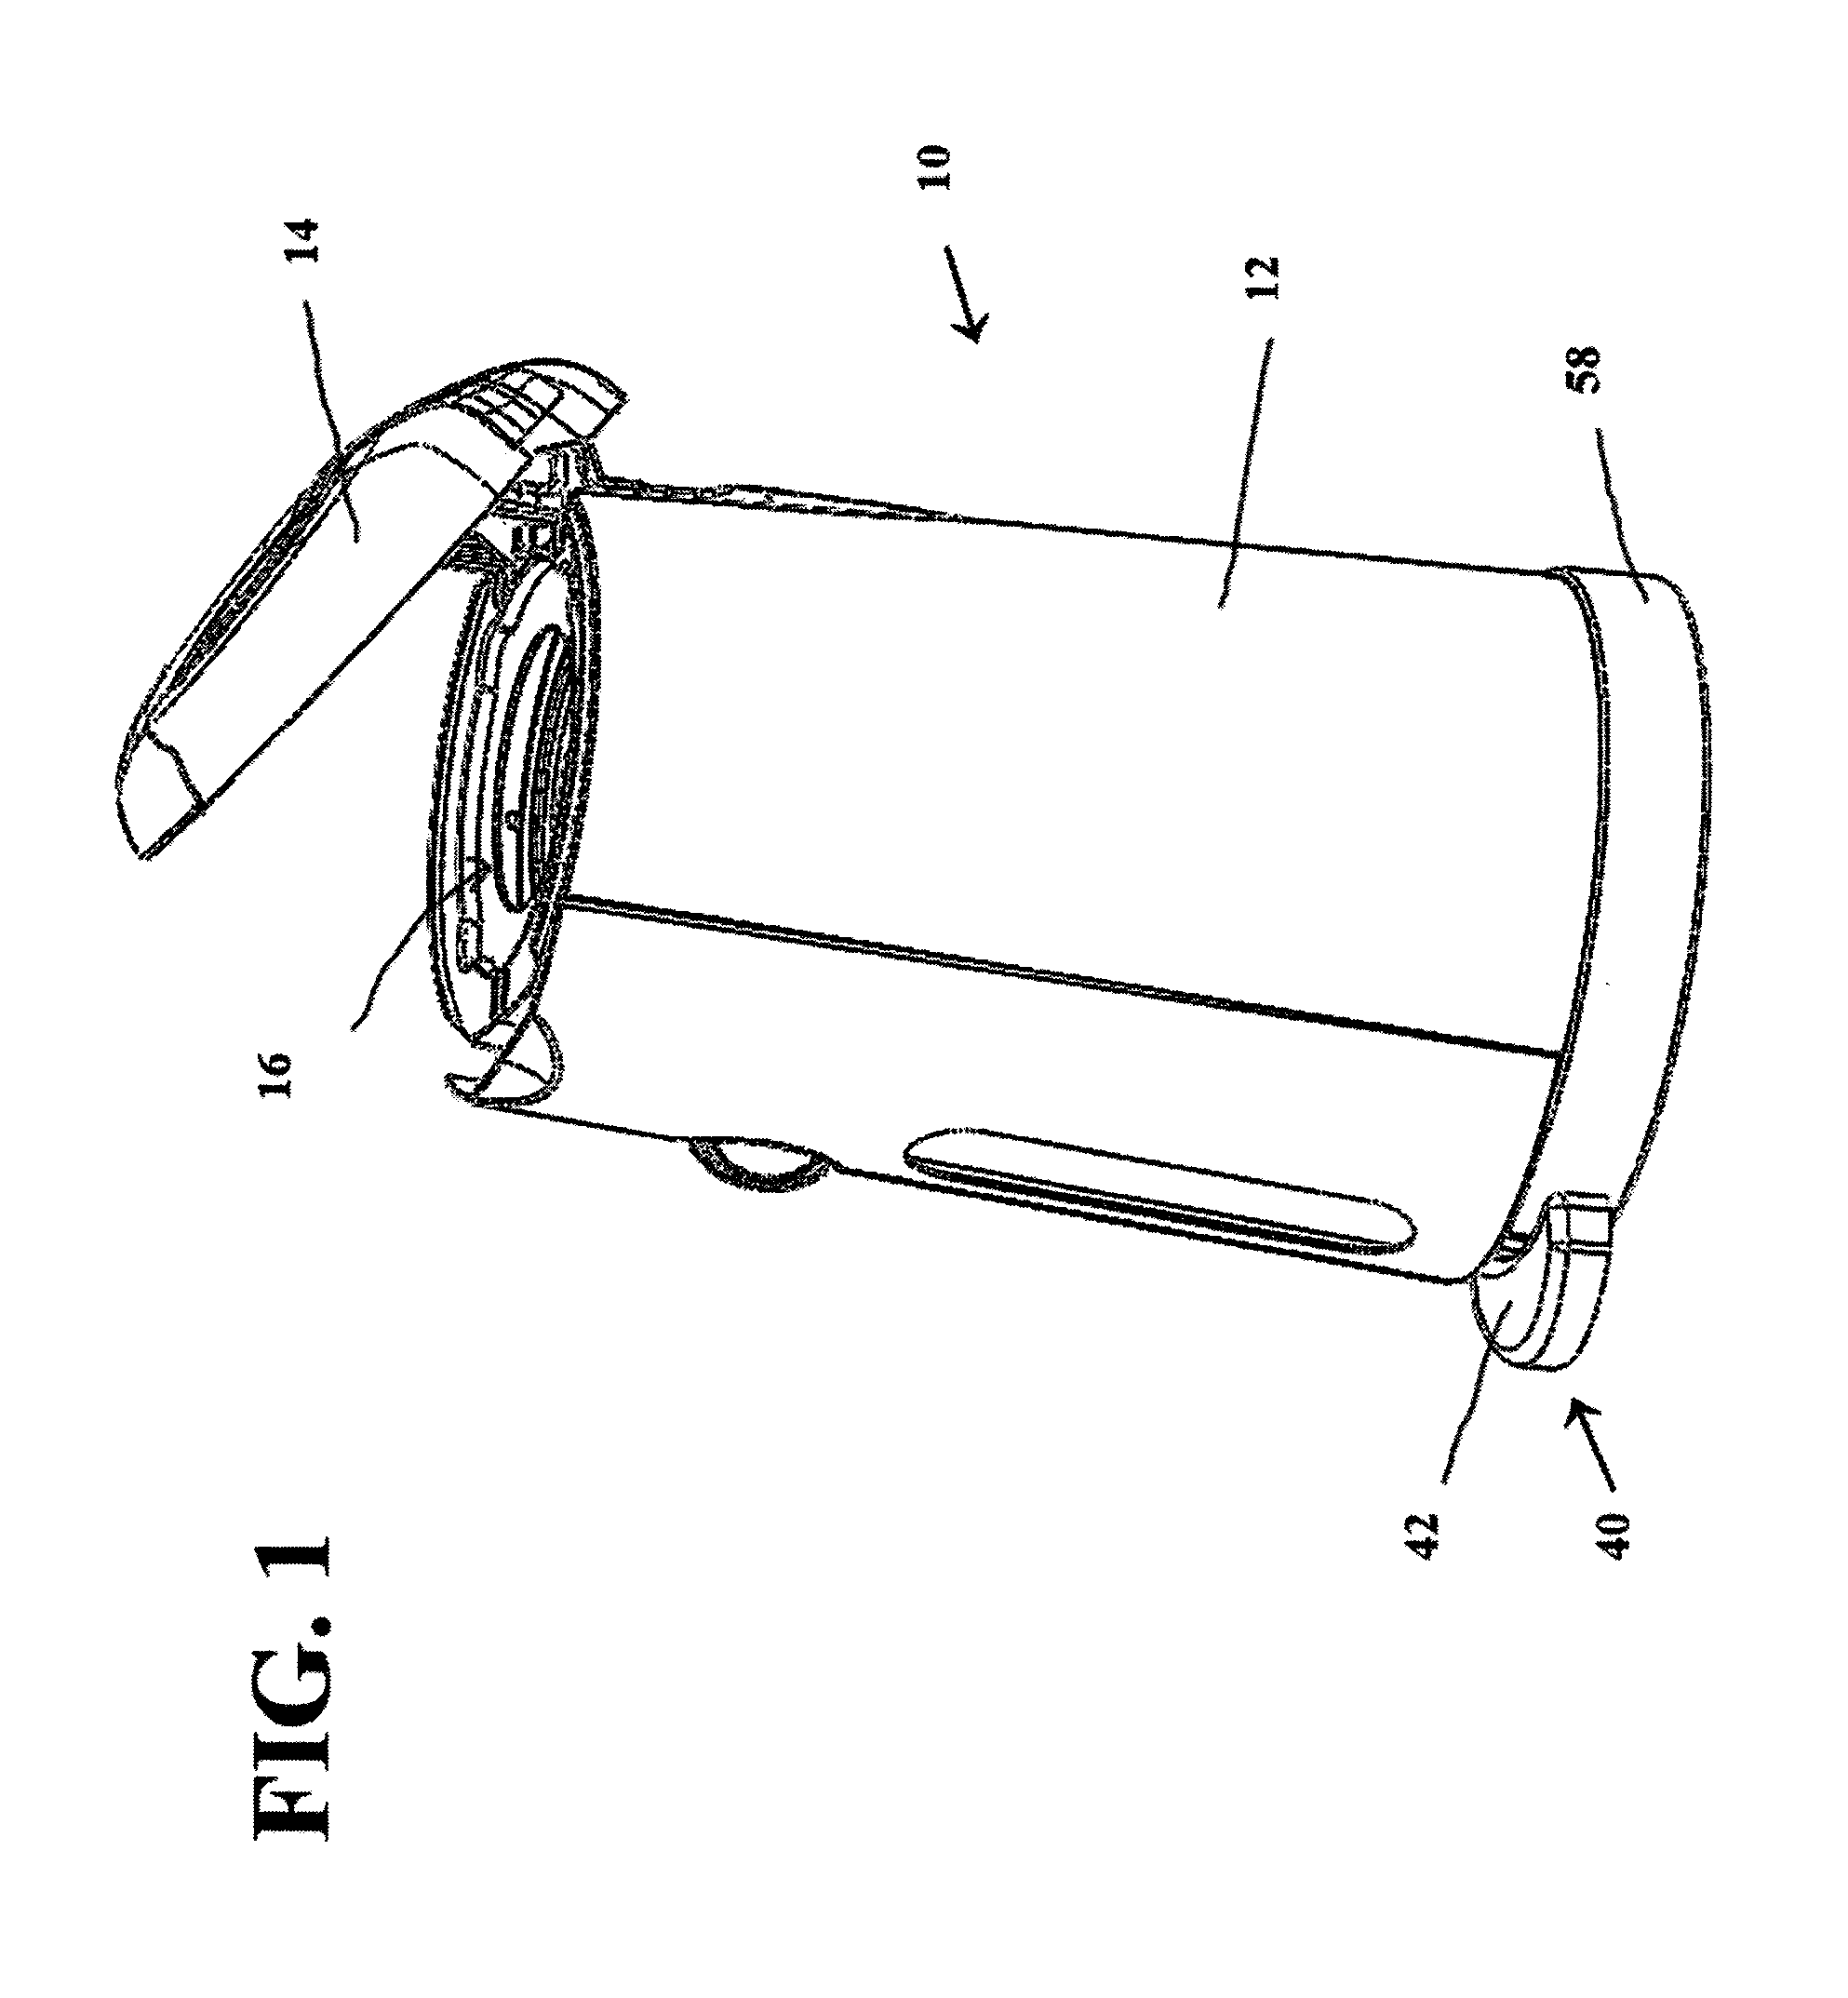 Waste disposal device with self-closing lid